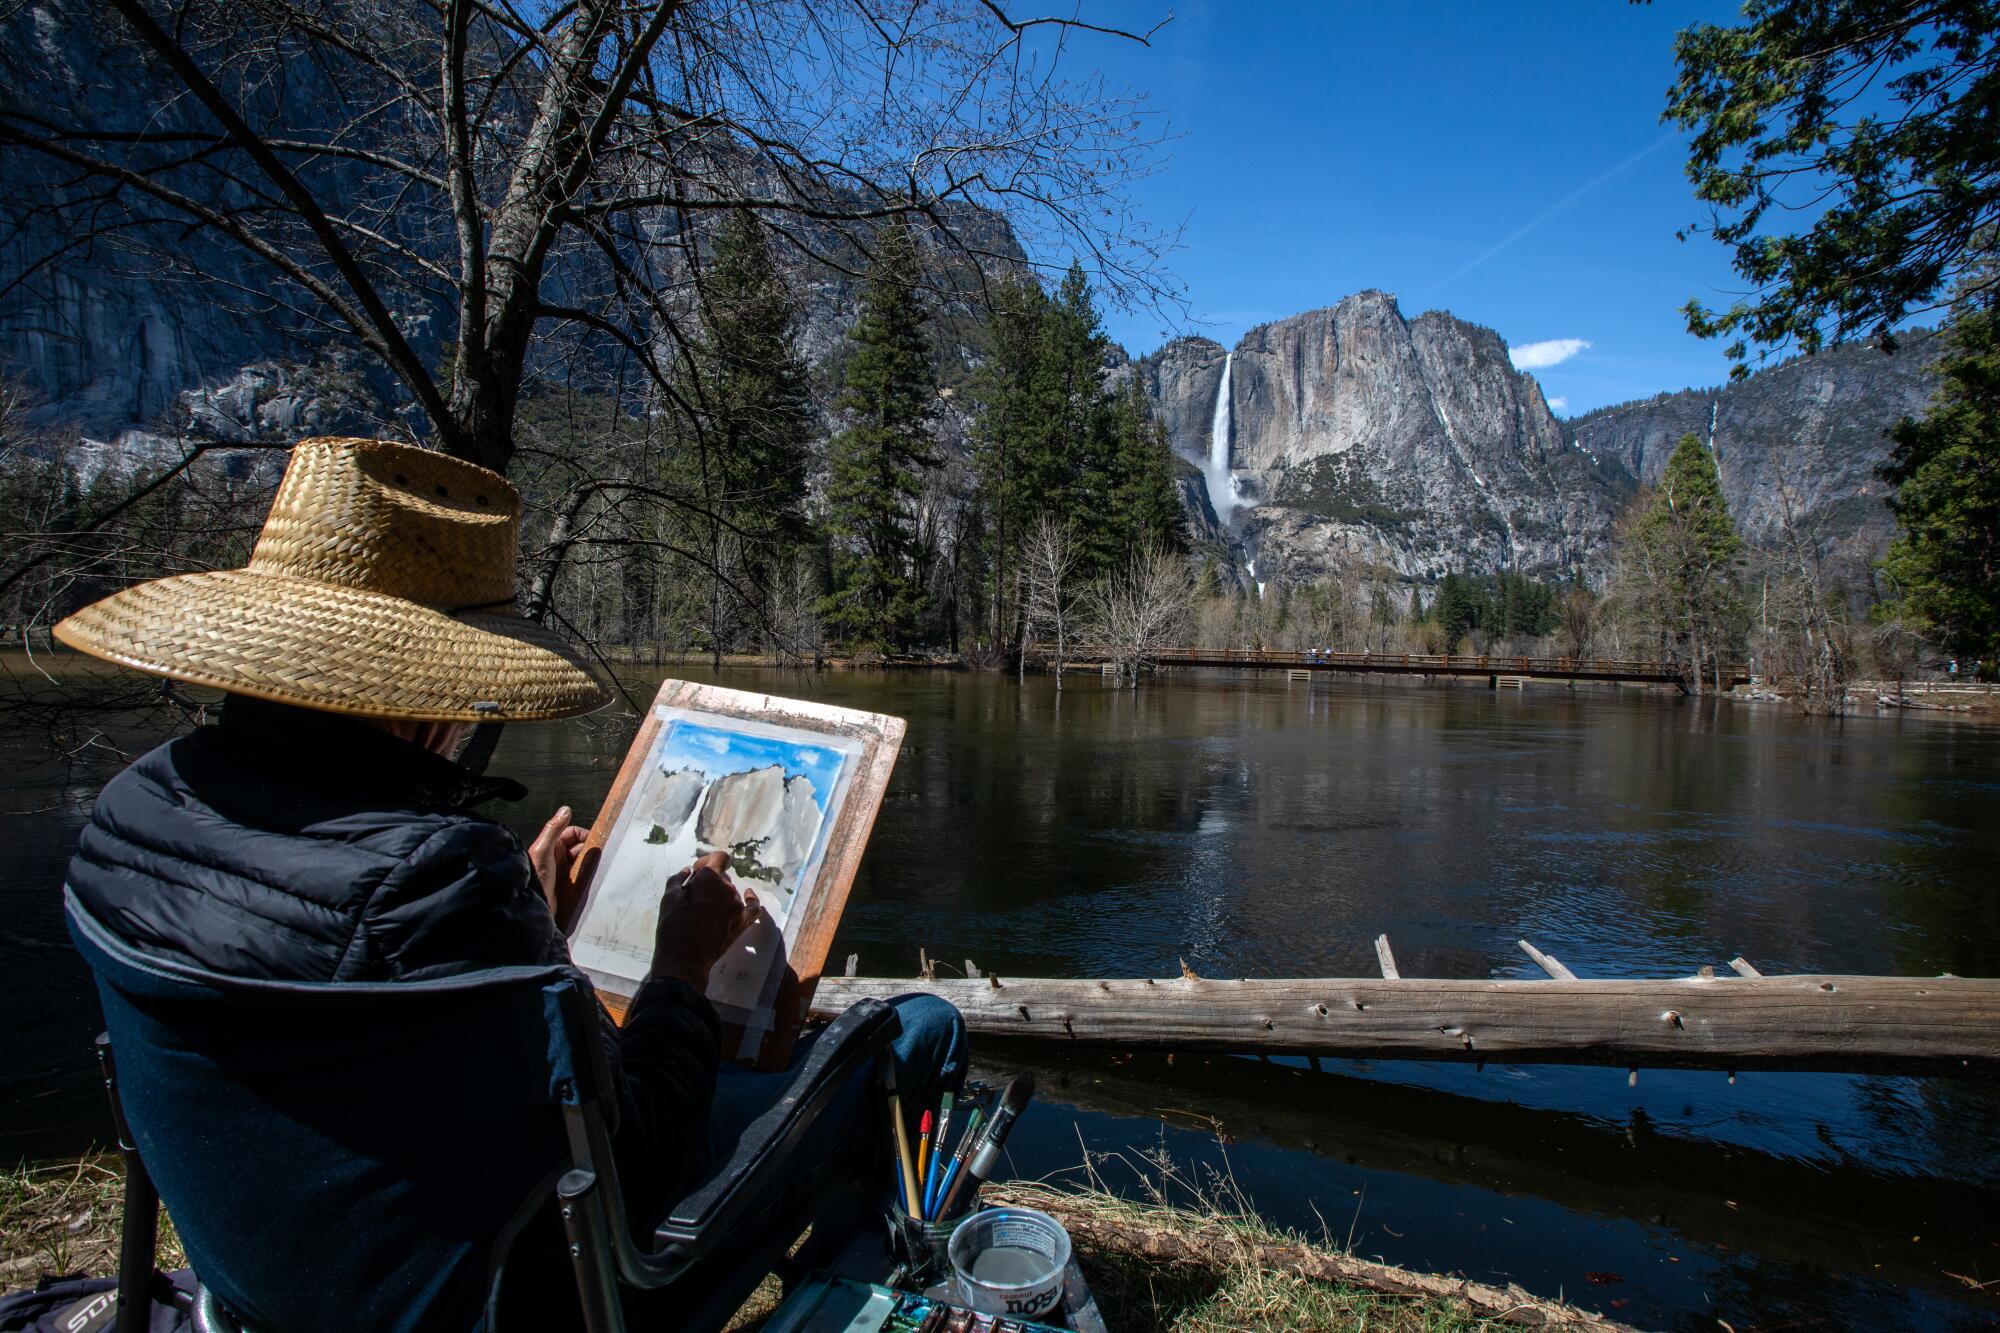 A man in a hat paints a Yosemite Valley scene.